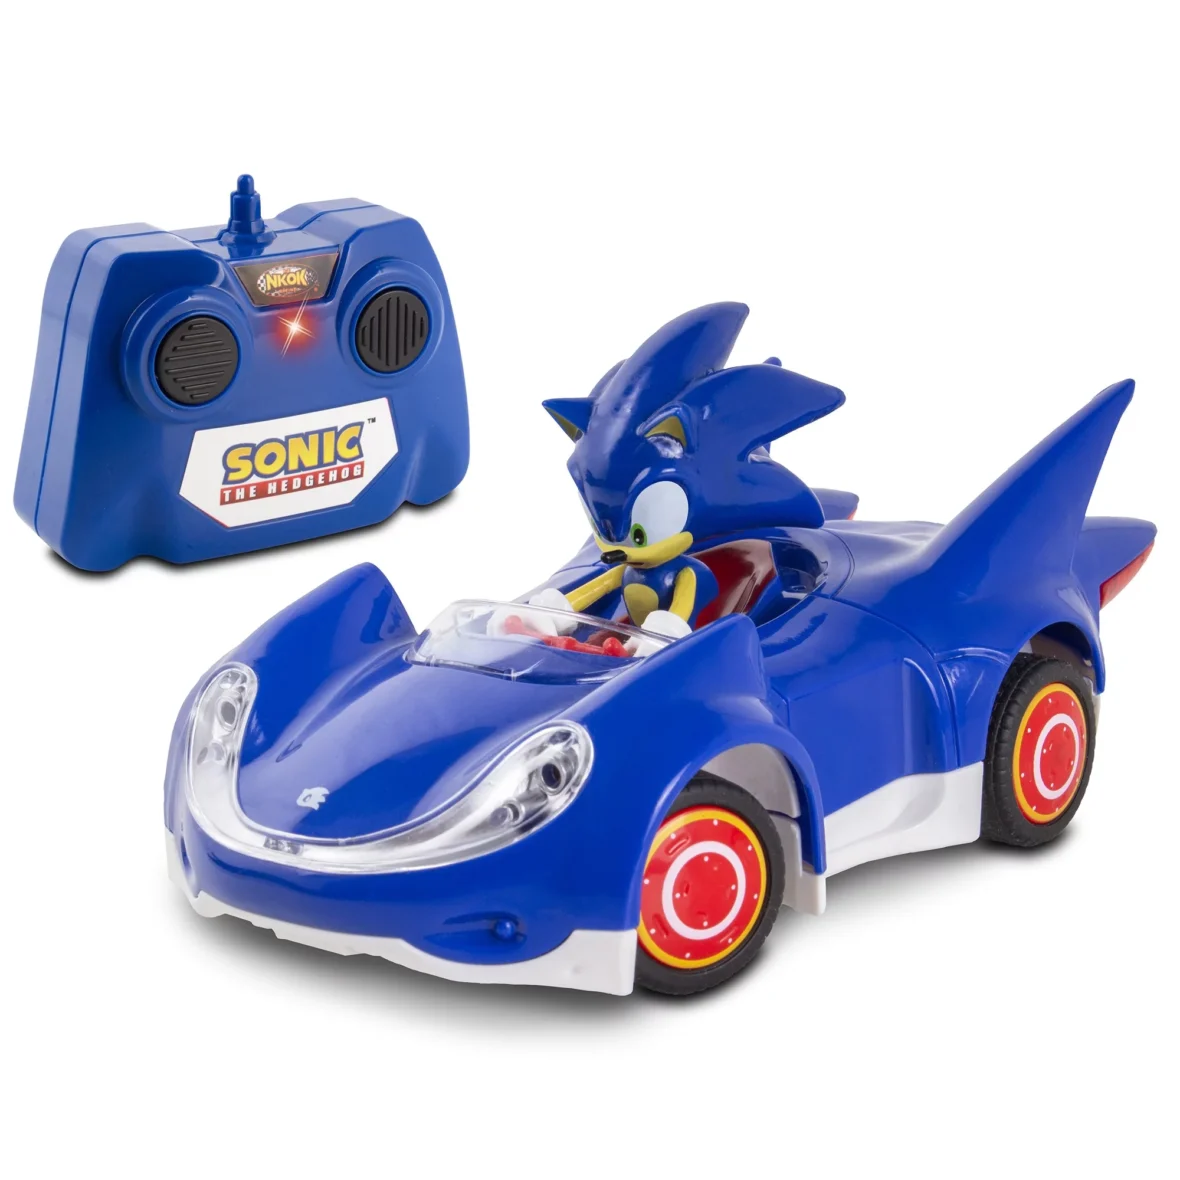 Sonic the Hedgehog & Sega All-Stars Racing RC: 1:28 Scale 2.4GHz Remote Controlled Car, 6.5″